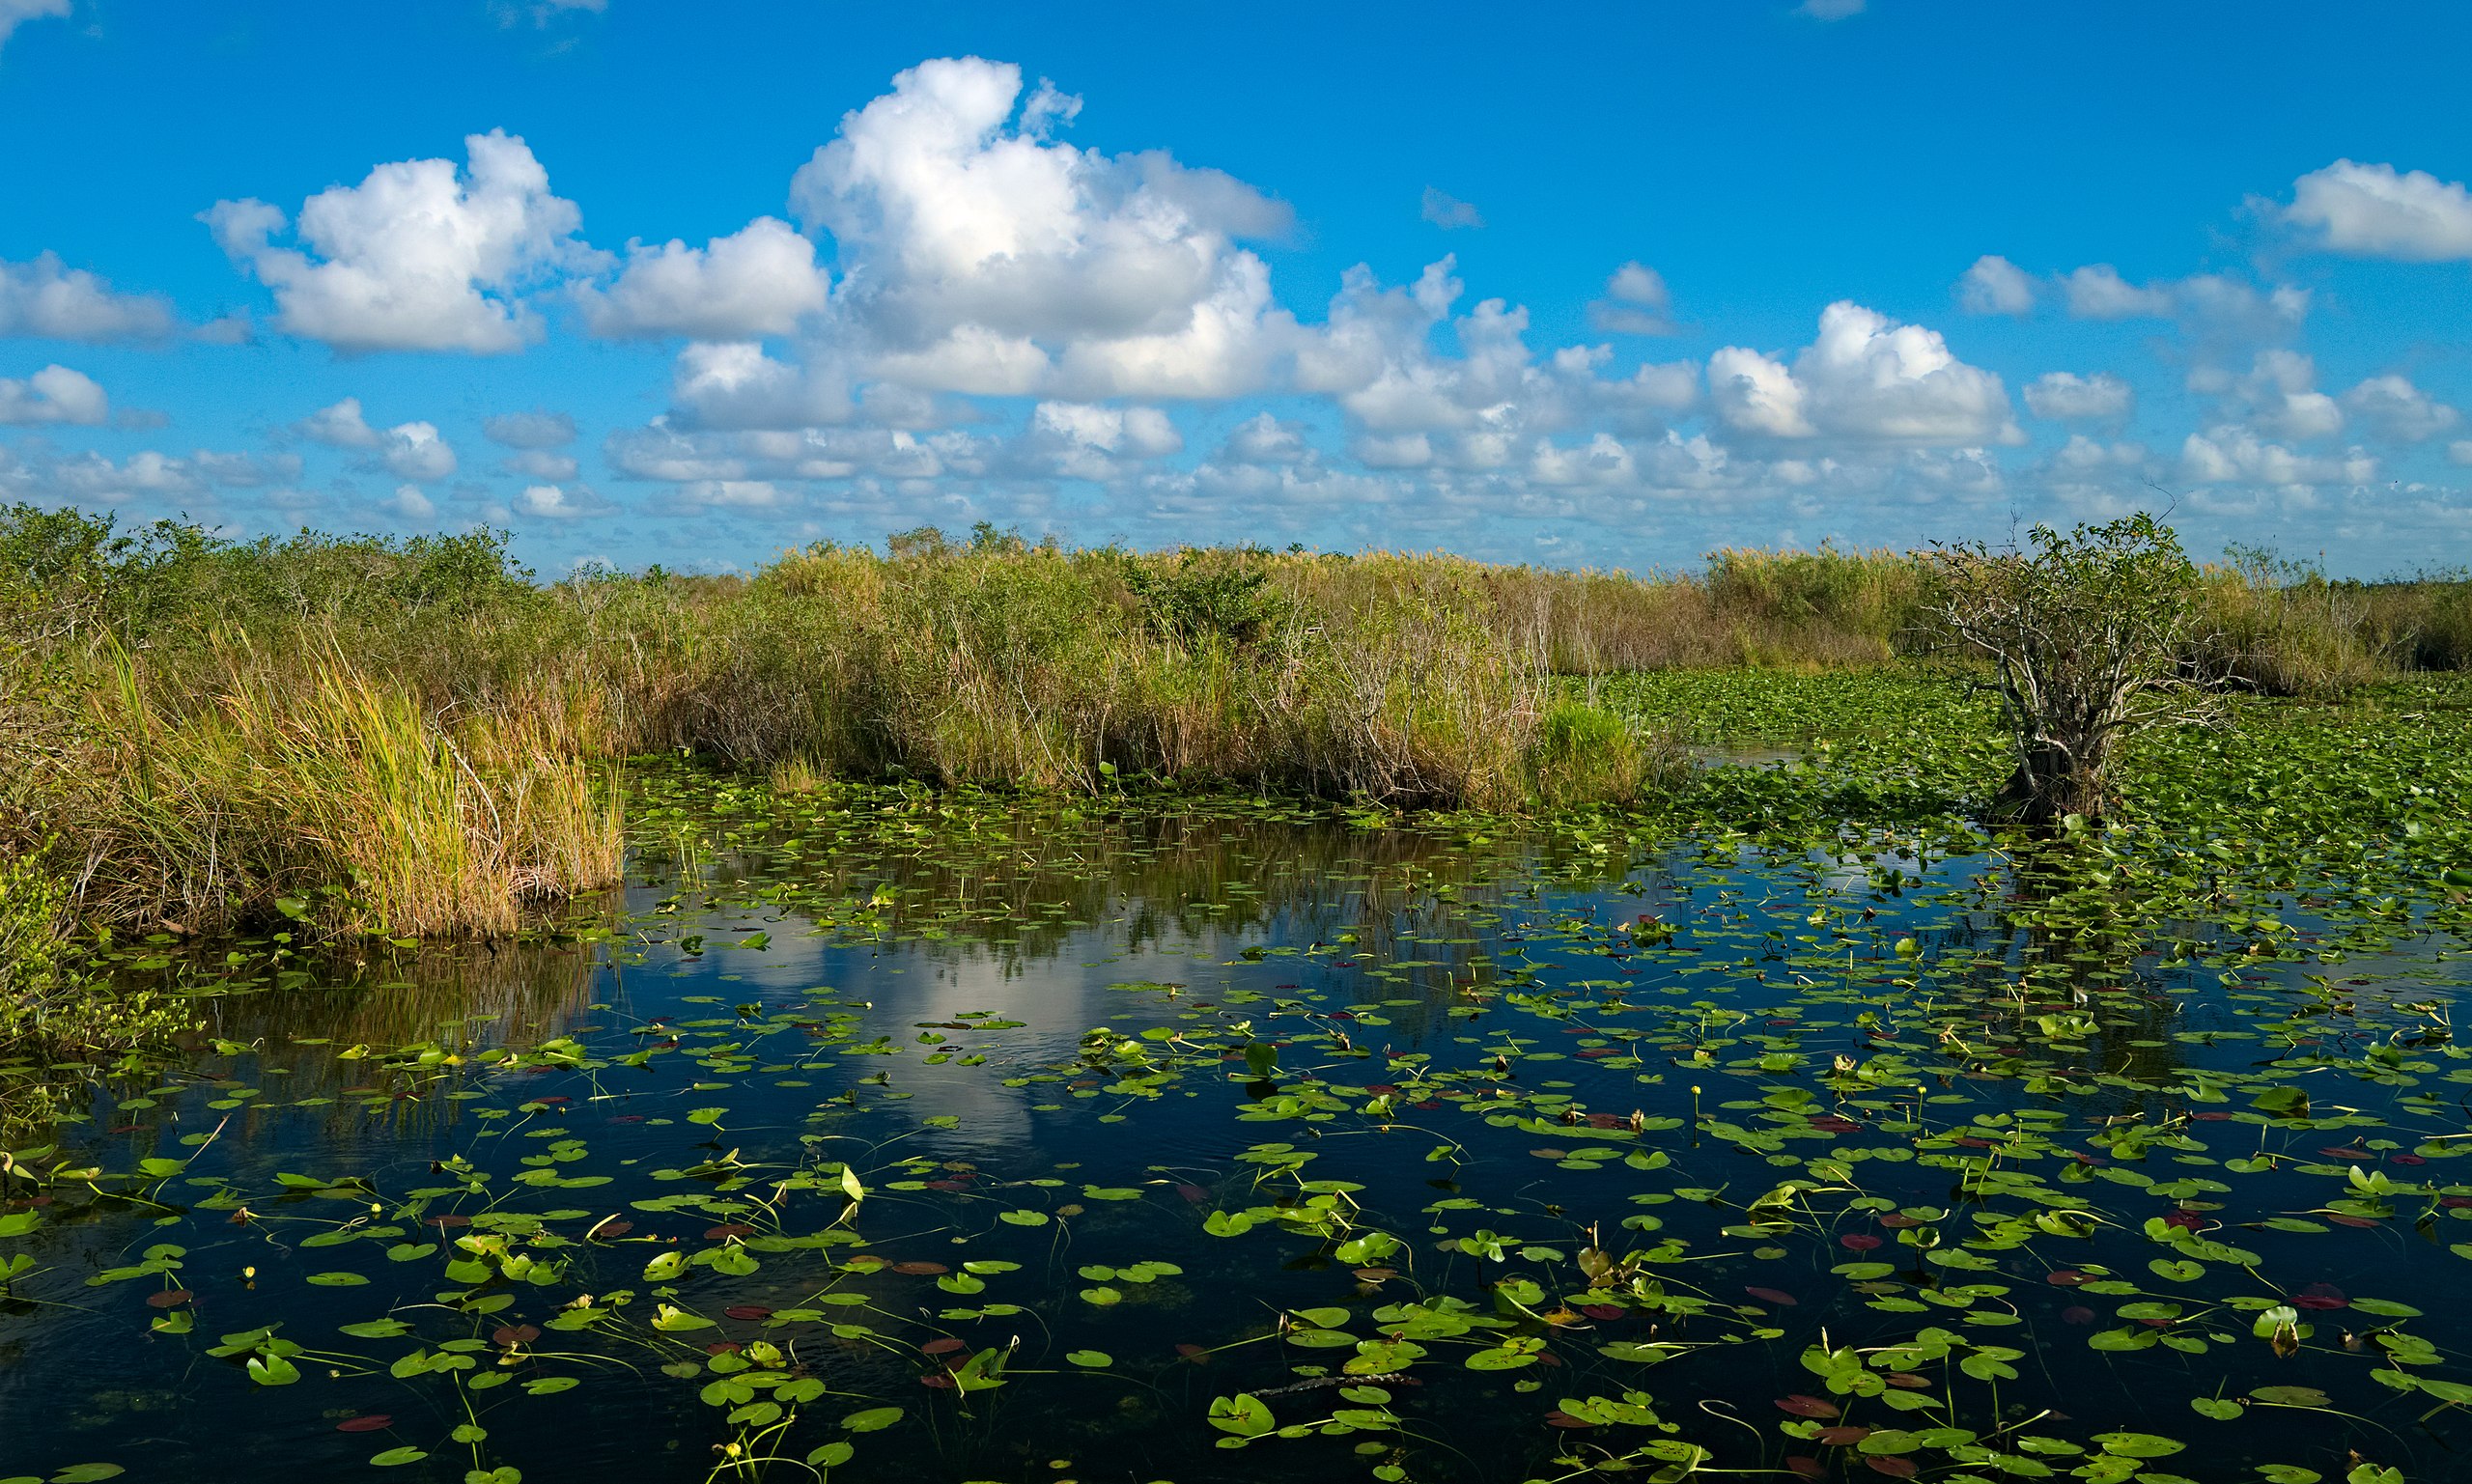 <p>Protecting <strong>1.5 million acres of swamp and marshland</strong>, this crucial ecosystem is the home of some of Florida’s best wildlife. </p>  <p>Alligators, American crocodiles, panthers, manatees, and river otters are just some of the animals you can see here.</p>